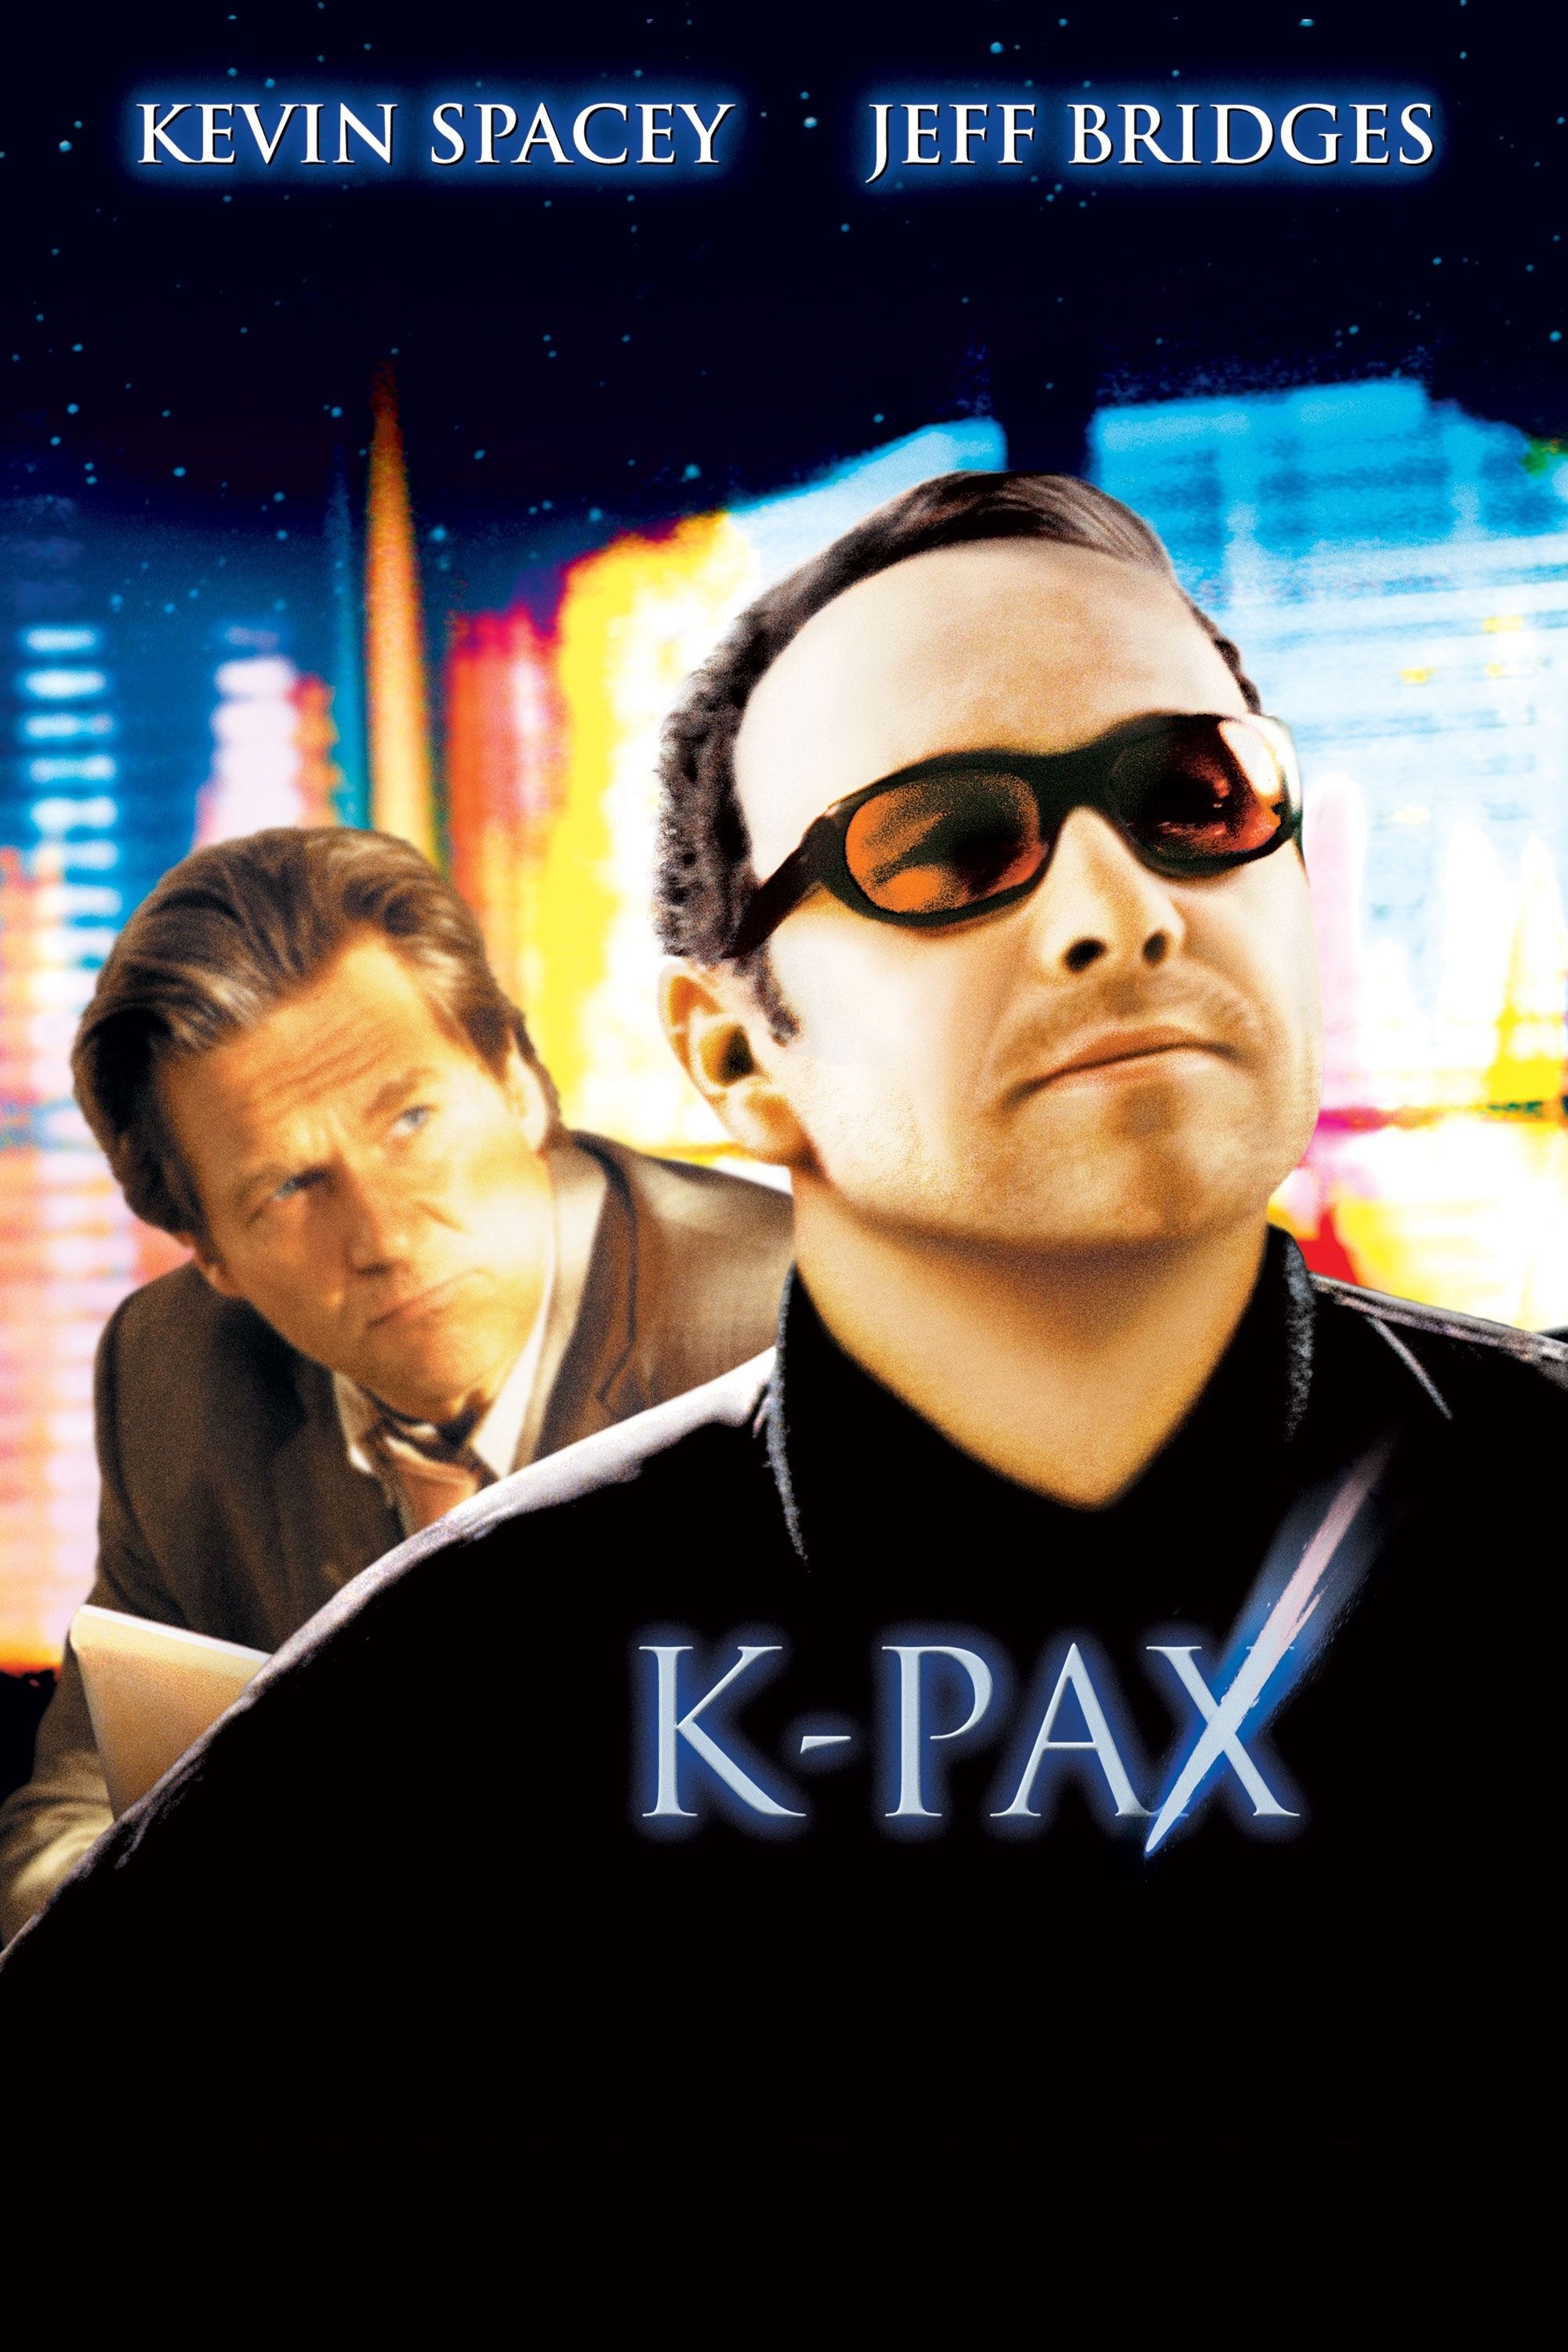 K-PAX movie streaming, Accessible anywhere, Intriguing sci-fi film, Notable performances, 2000x3000 HD Handy